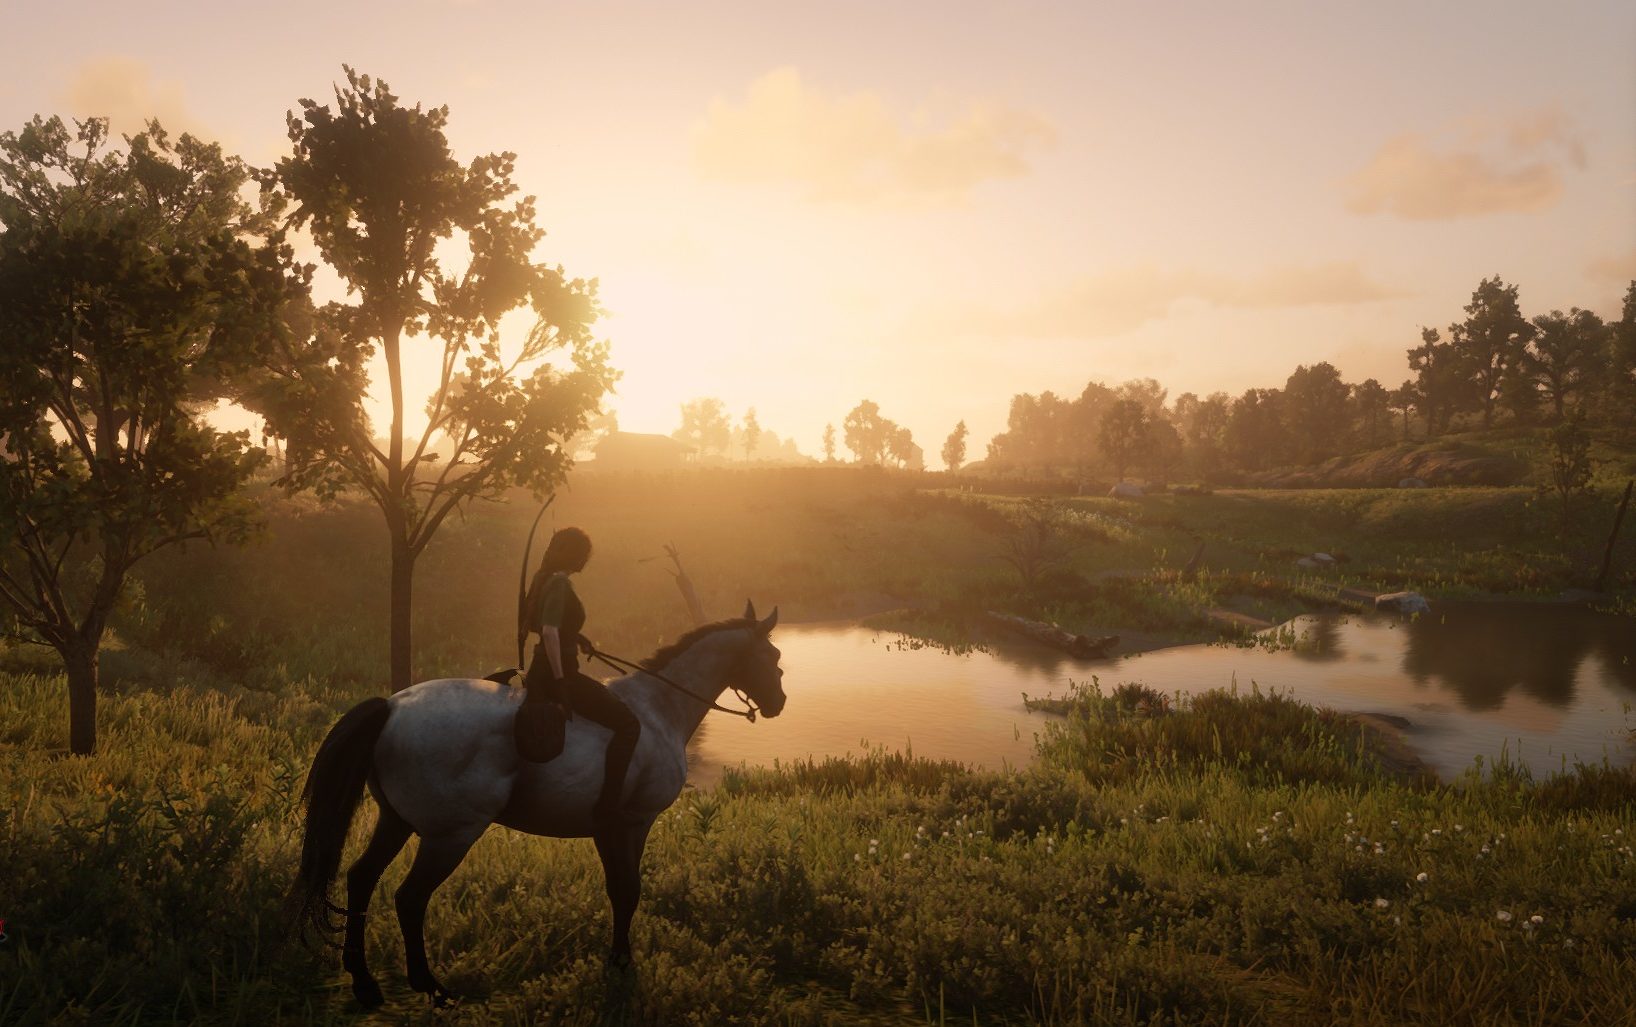 Renate sitting on horseback with her bow on her back. The sun is setting in the background over a small pond and a few trees.